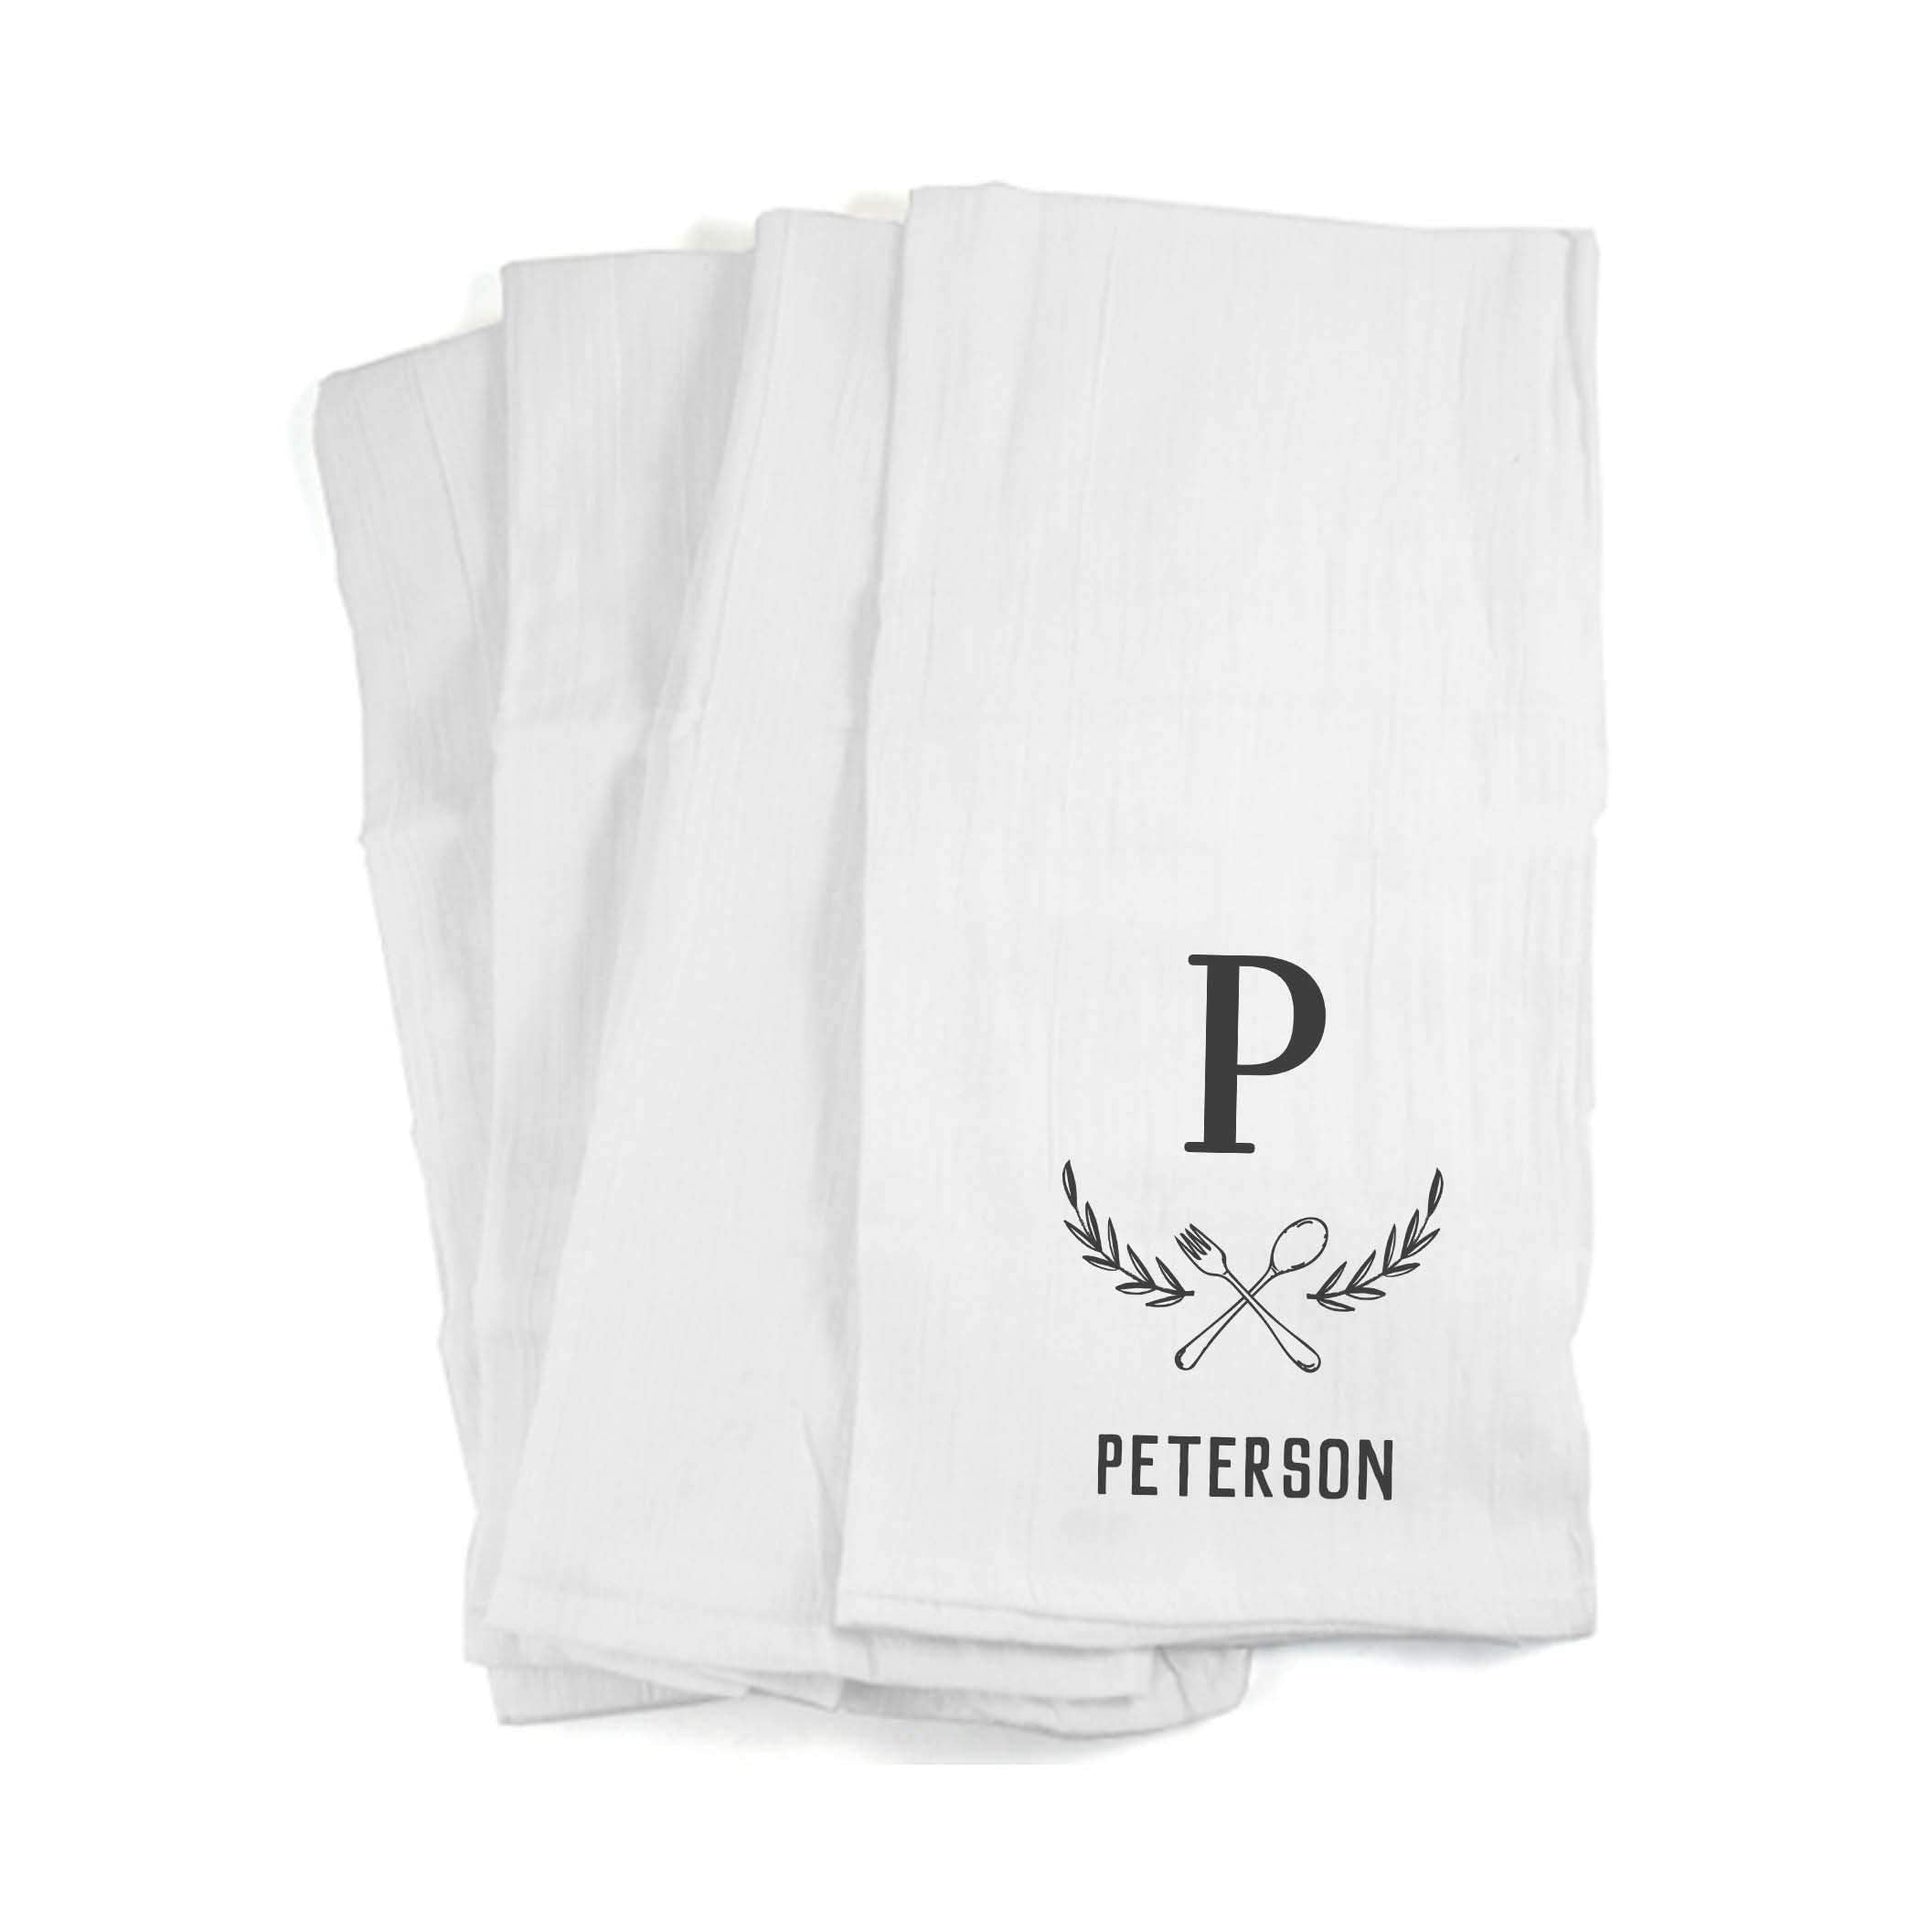 Kitchen towel custom printed with fork and spoon design and personalized with your initial and name.